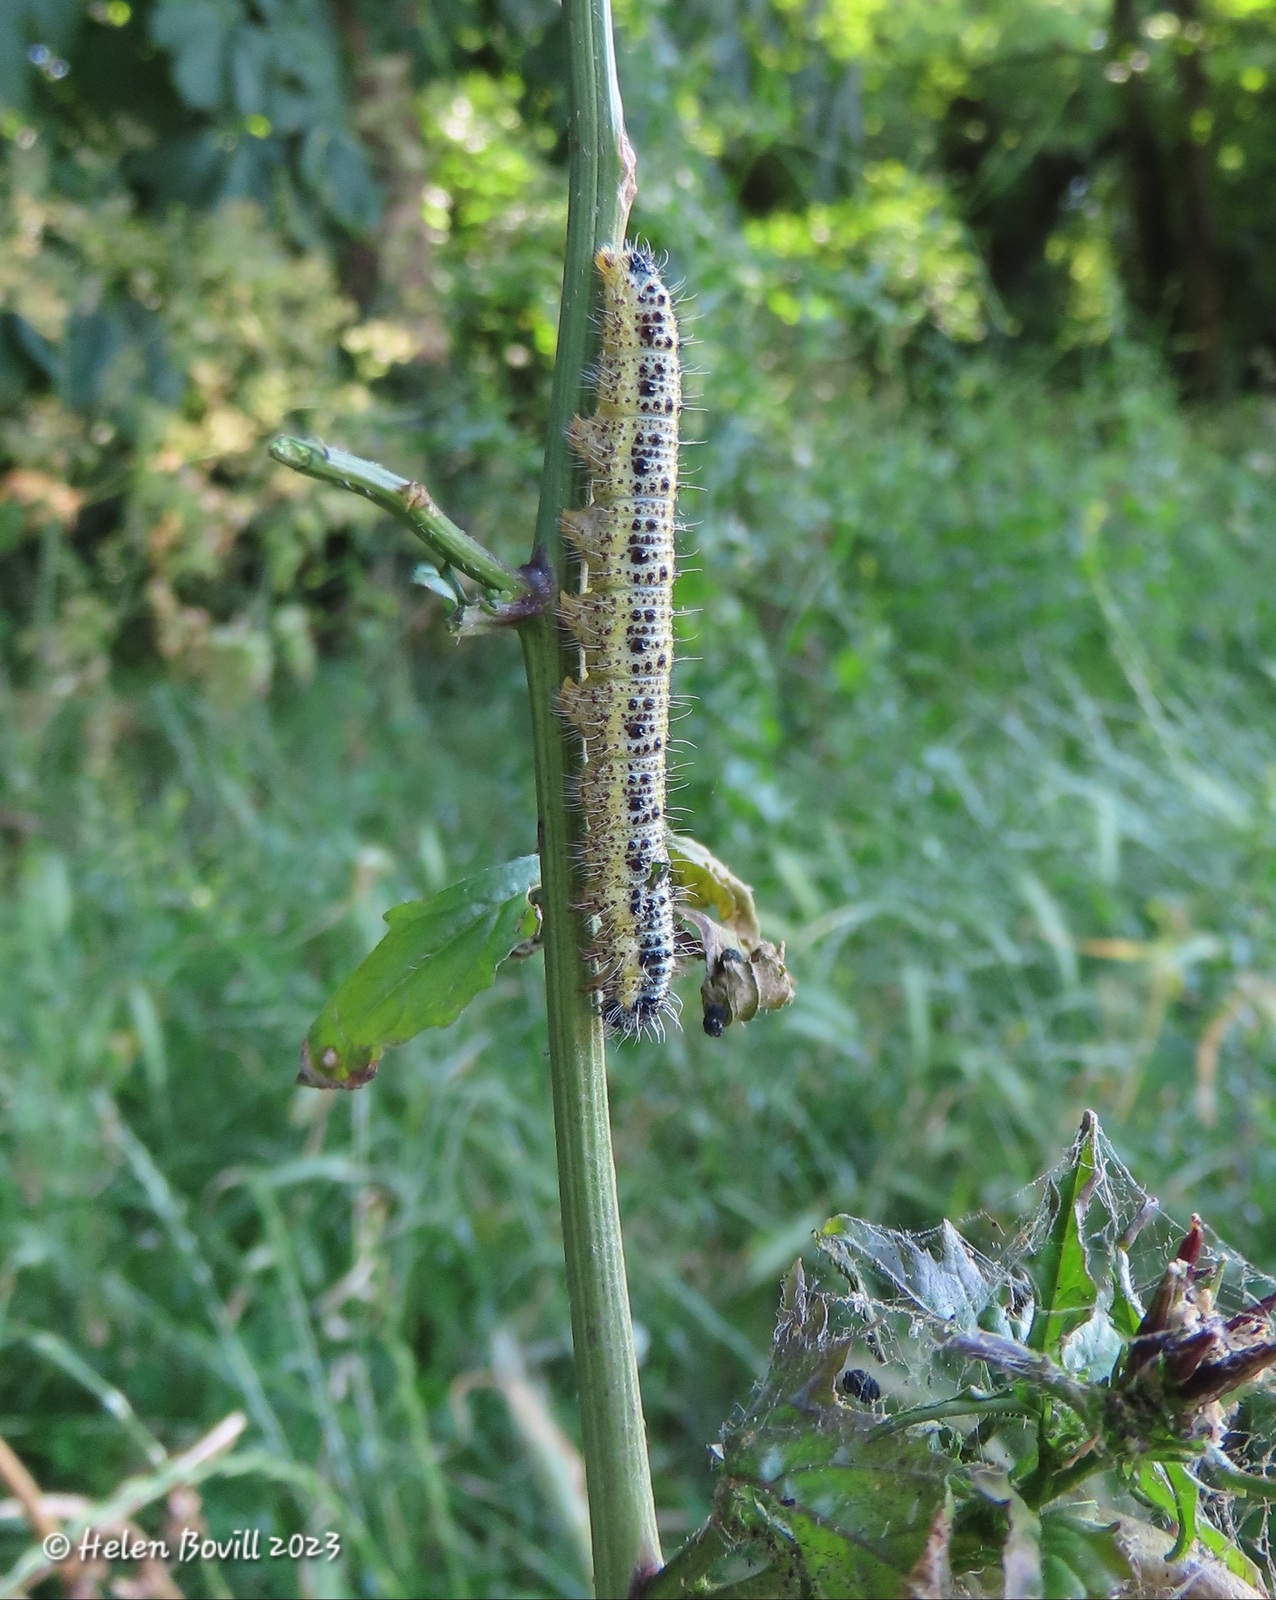 A Large White caterpillar on a well-eaten hedge mustard plant